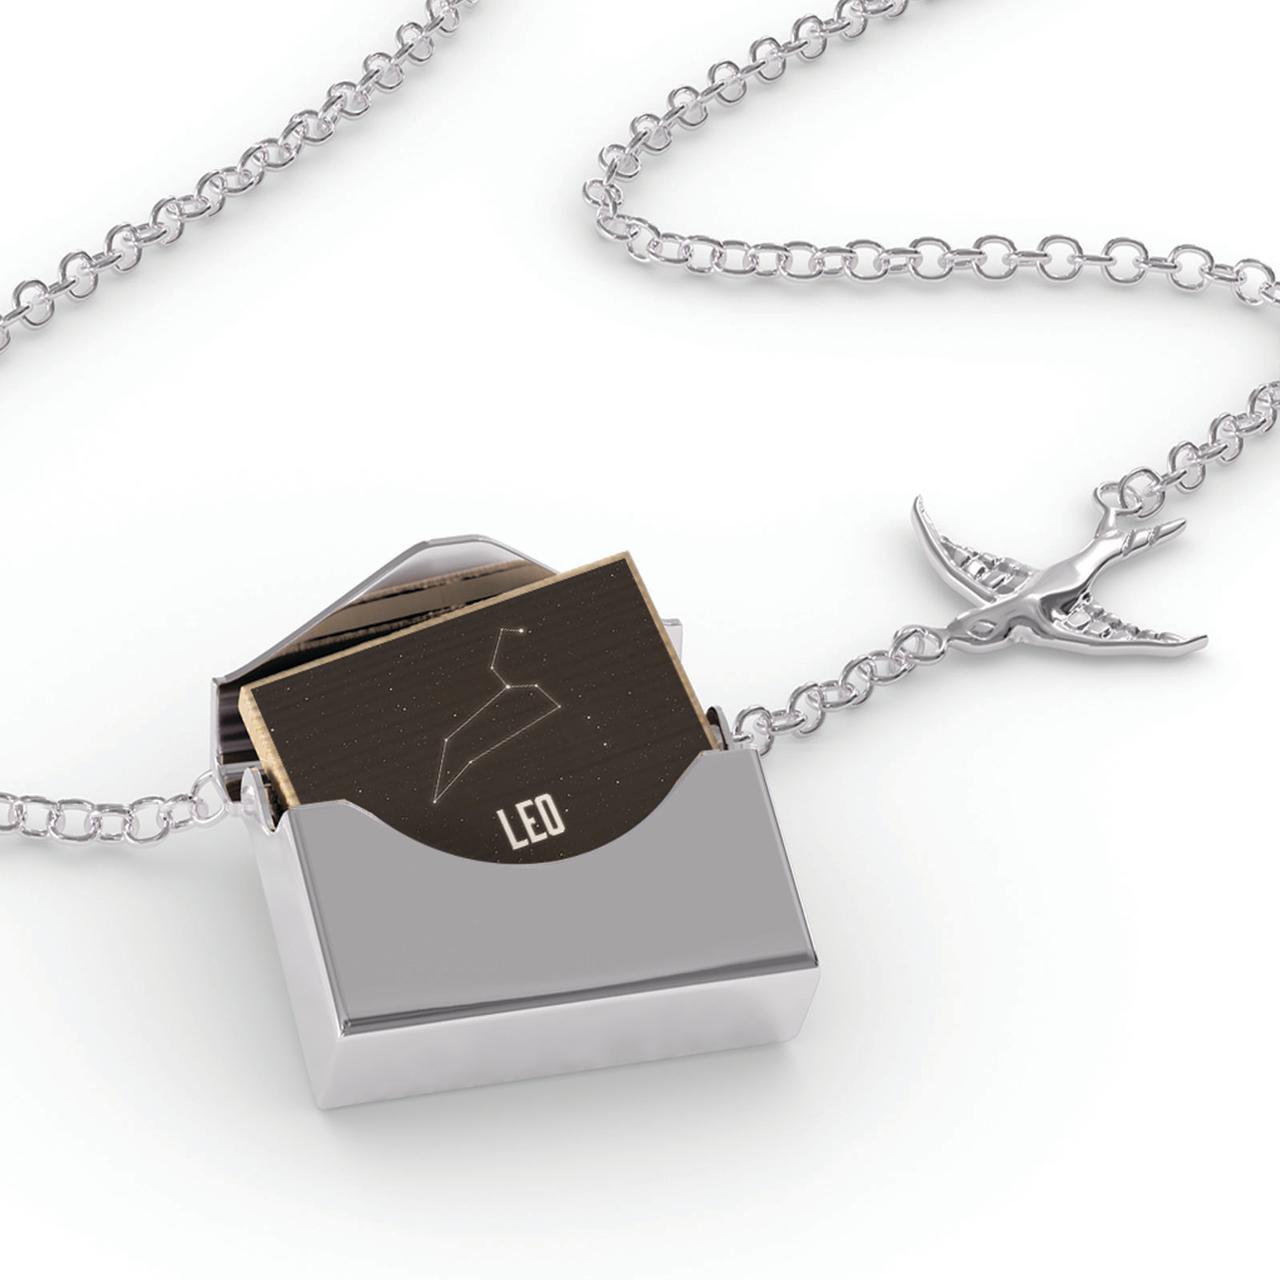 Locket Necklace Leo Star Constellation Zodiac Sign in a silver Envelope Neonblond - image 1 of 5